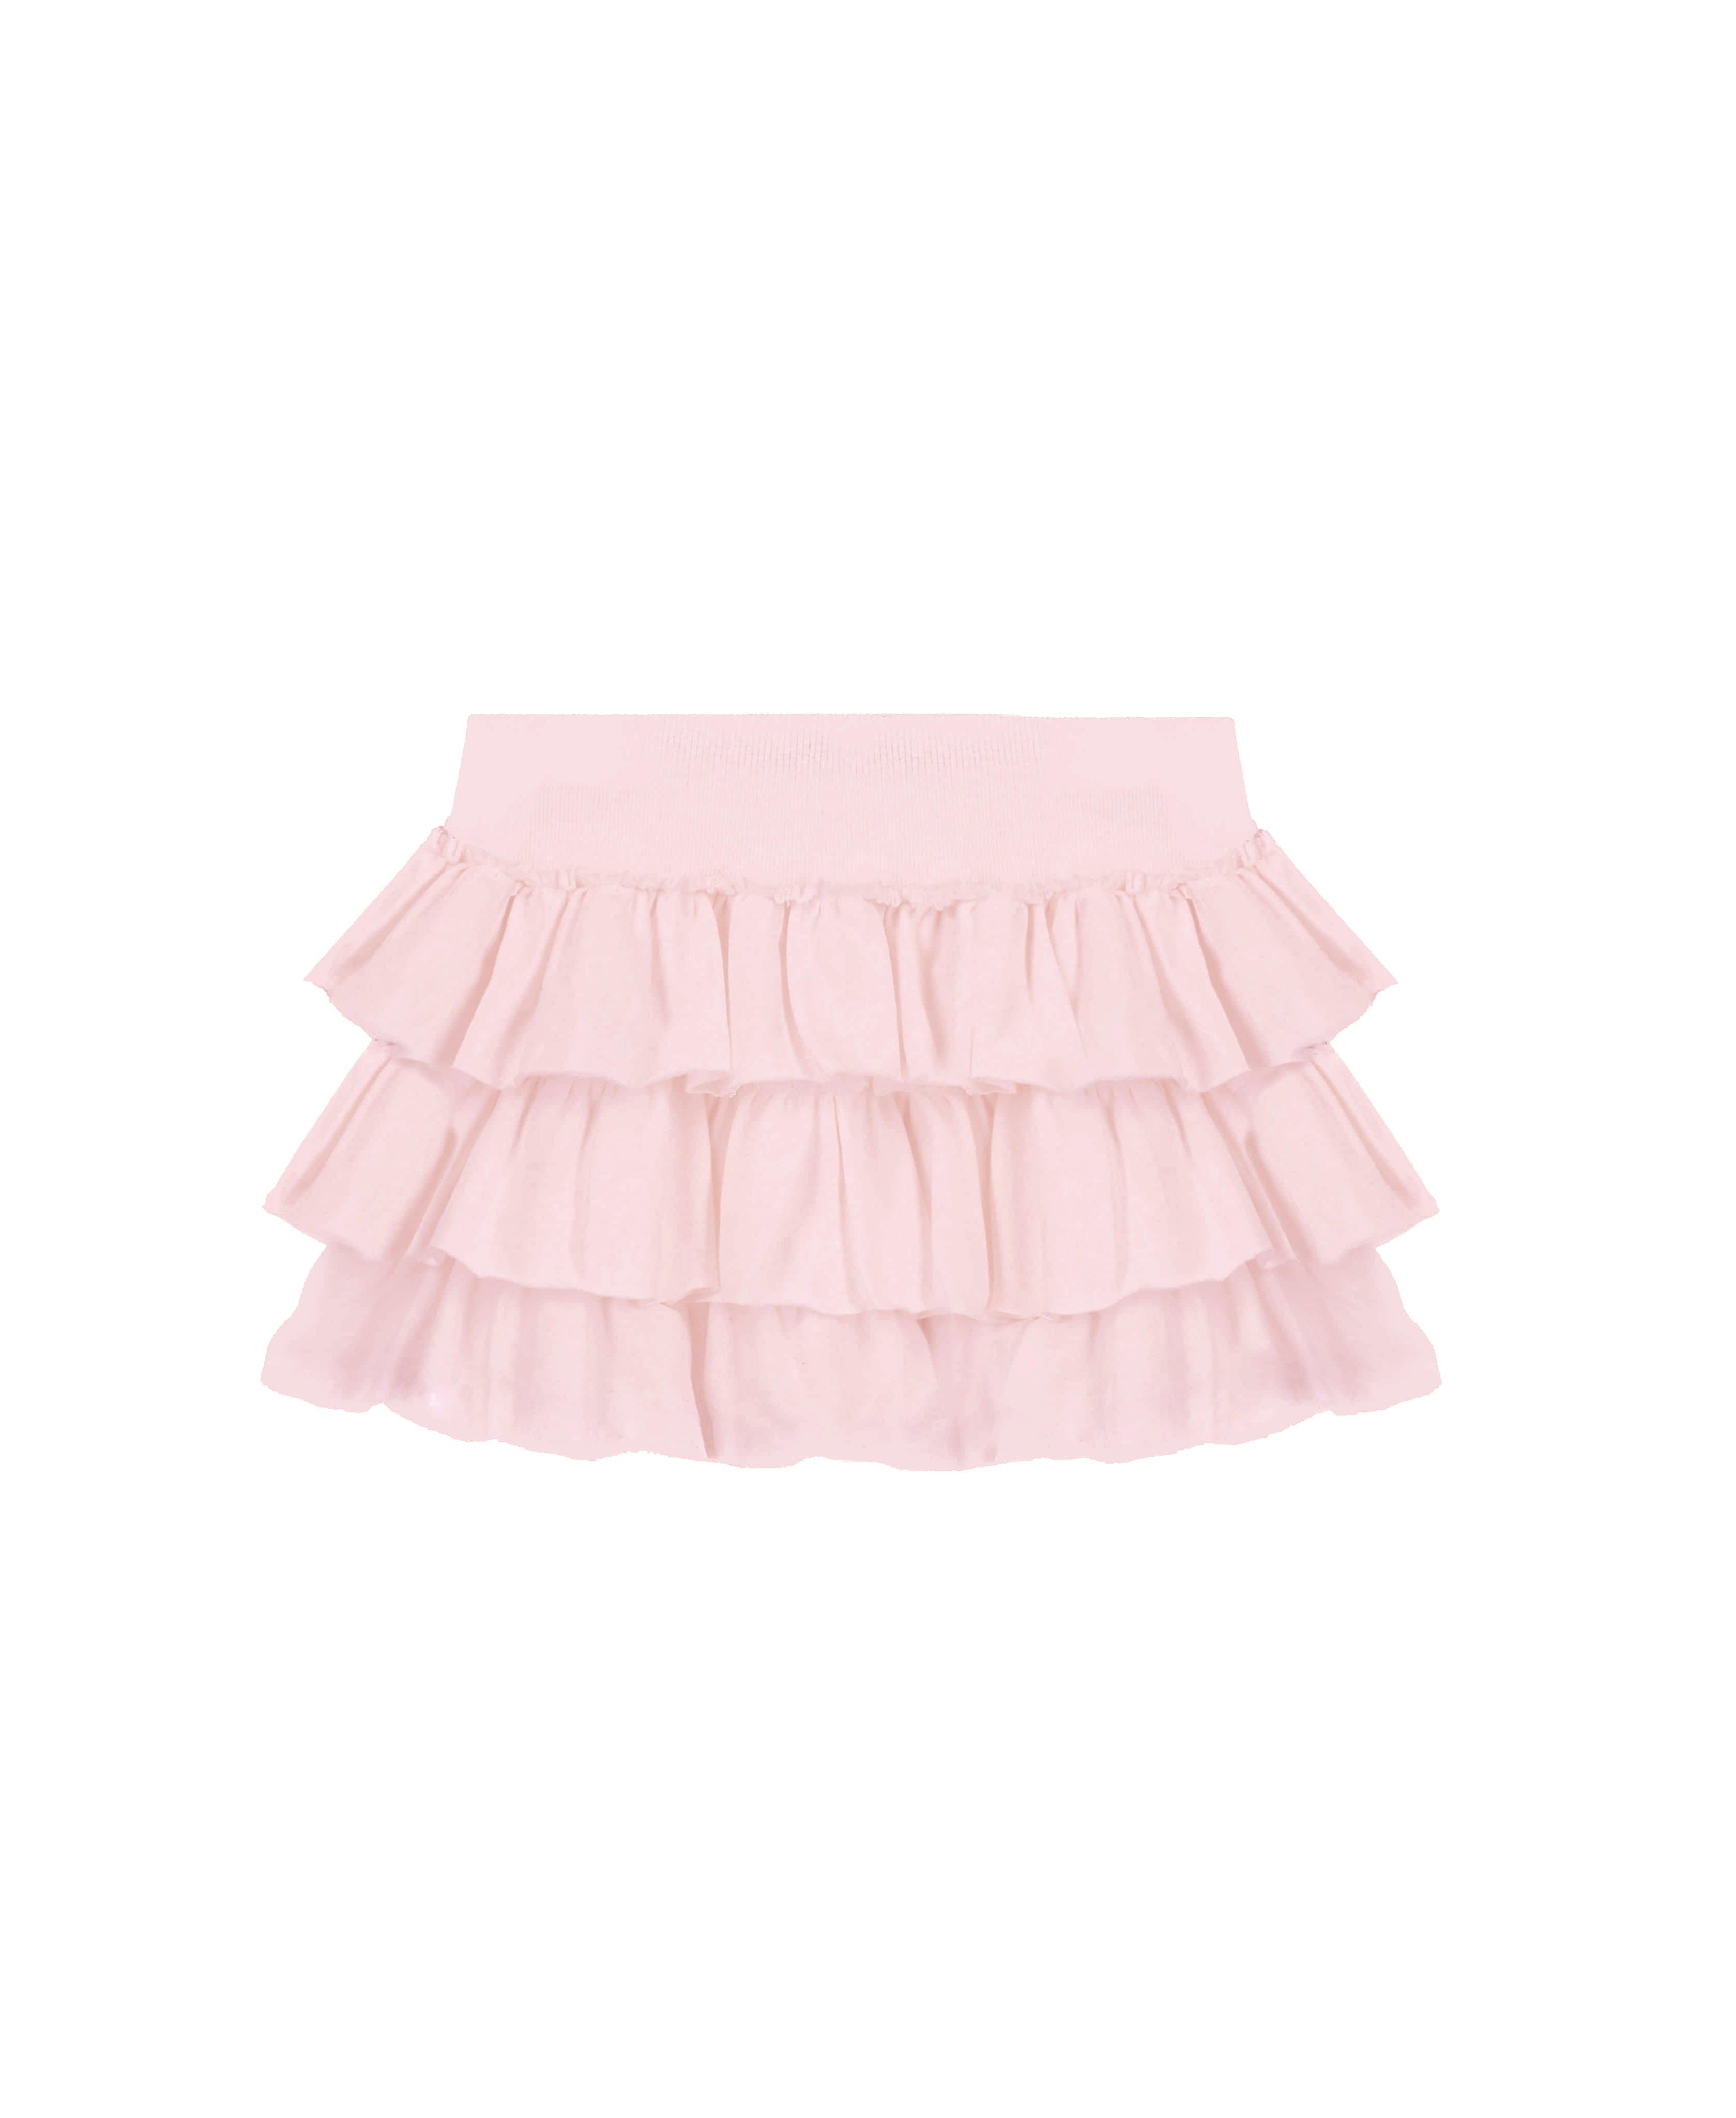 Libby two-tiered ruffle skirt / Baby pink